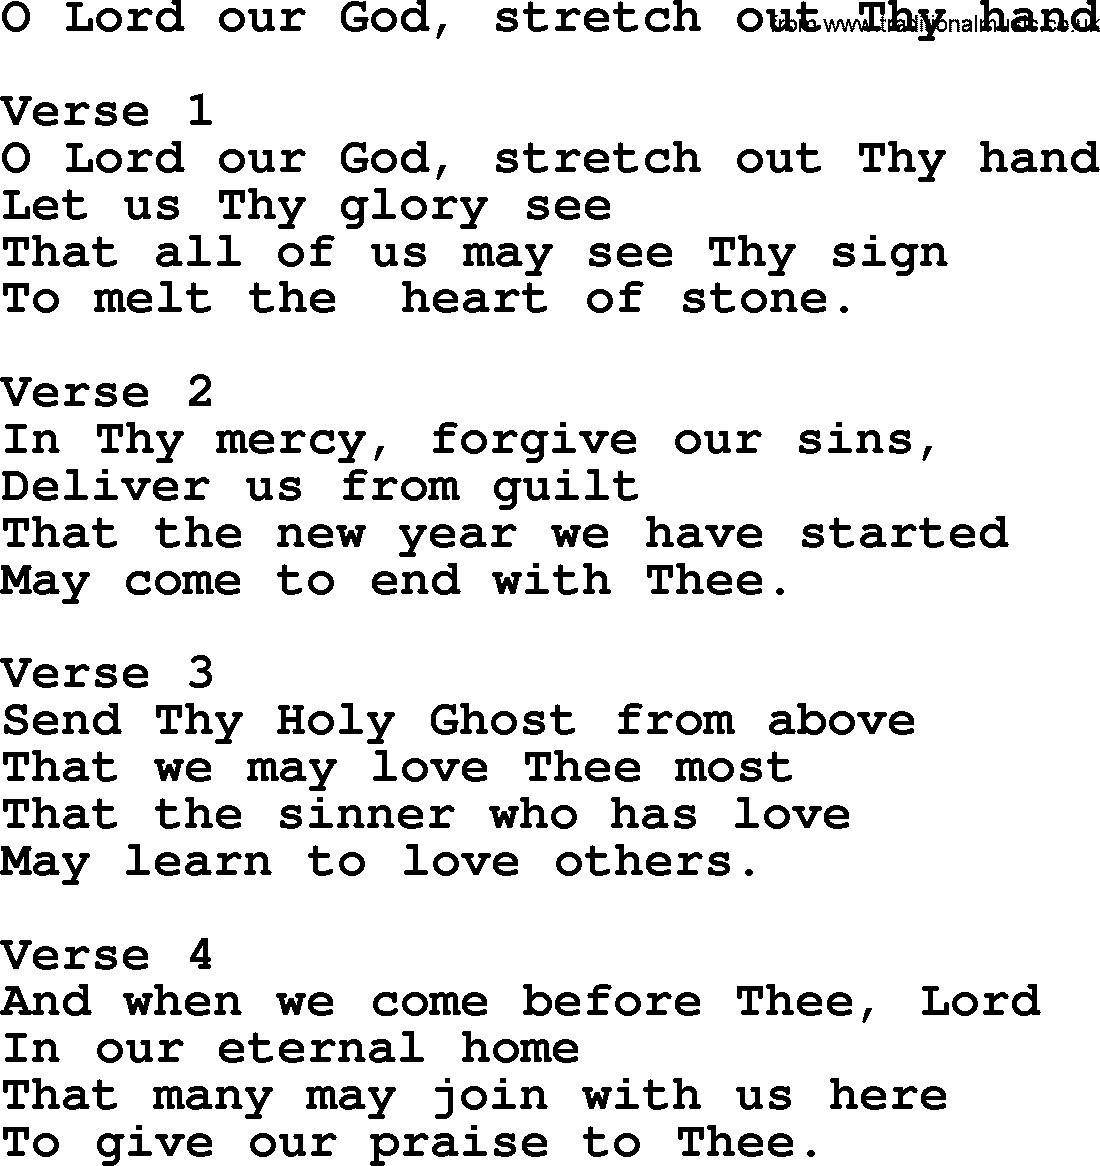 Apostolic and Pentecostal Hymns and Gospel Songs, Hymn: O Lord Our God, Stretch Out Thy Hand, Christian lyrics and PDF